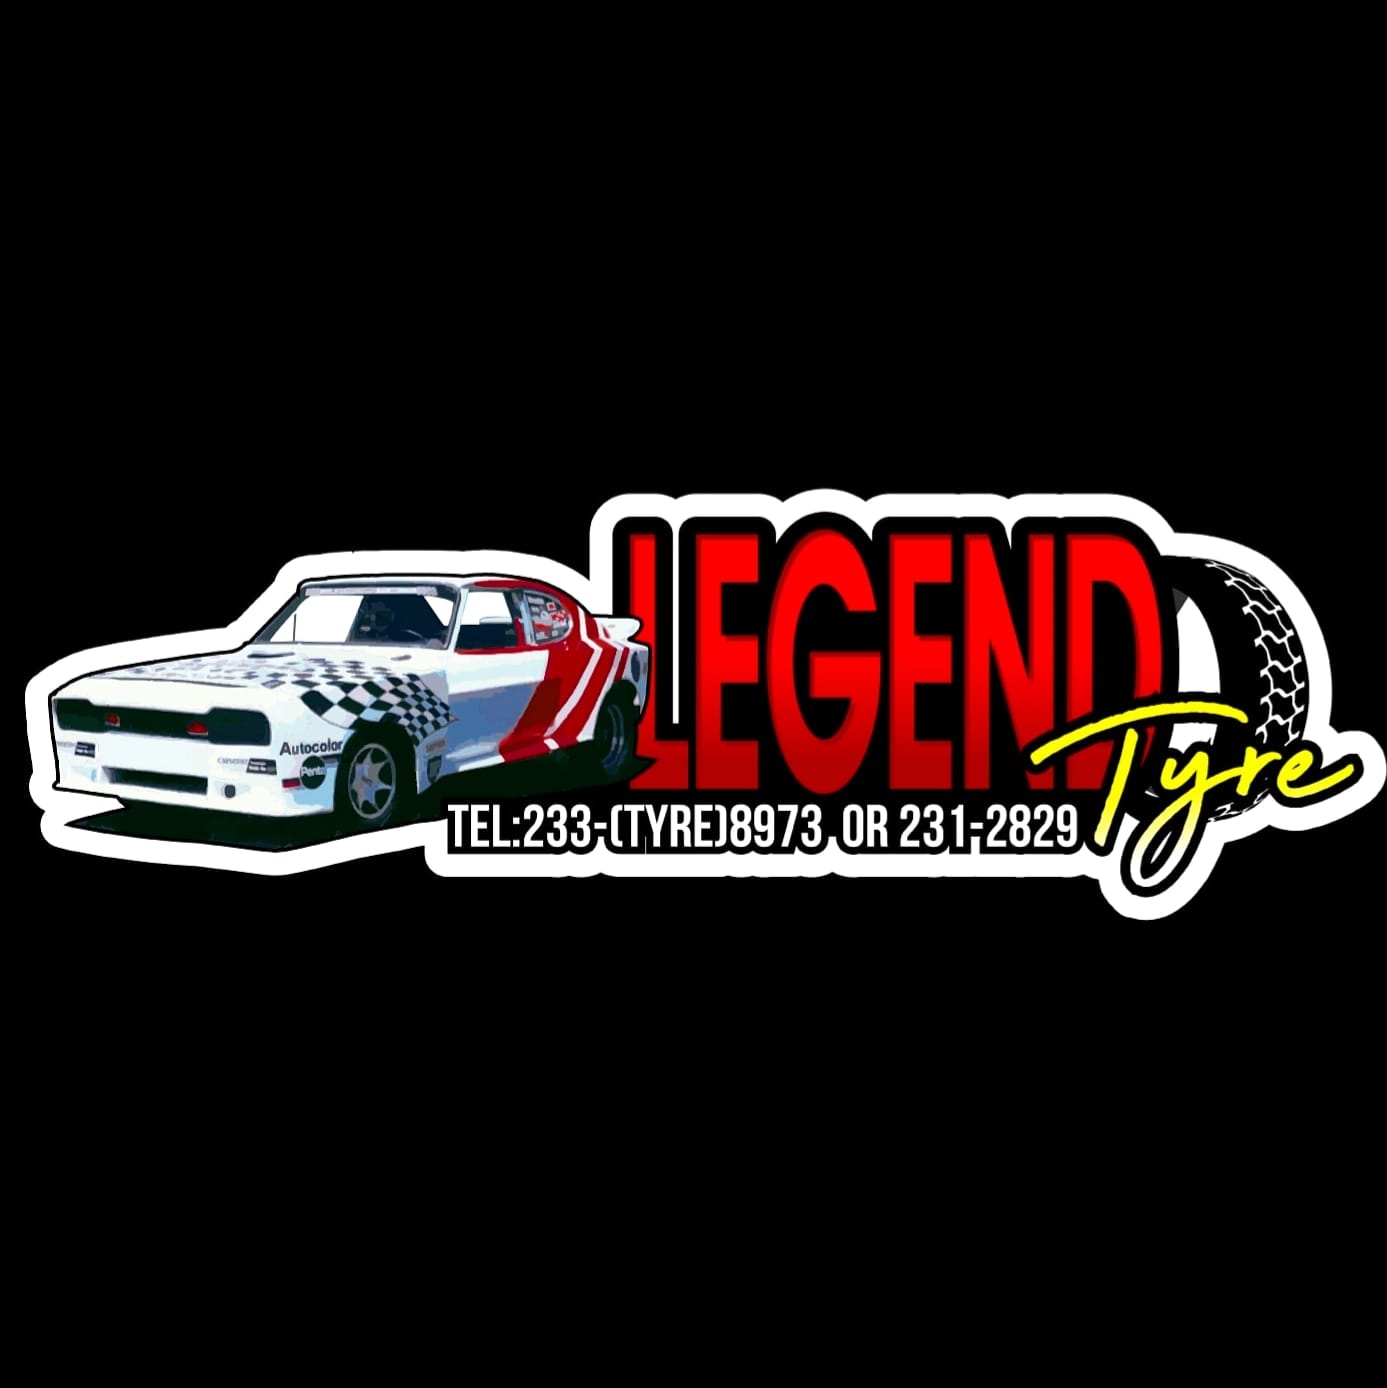 Legend Tyre and Auto Barbados